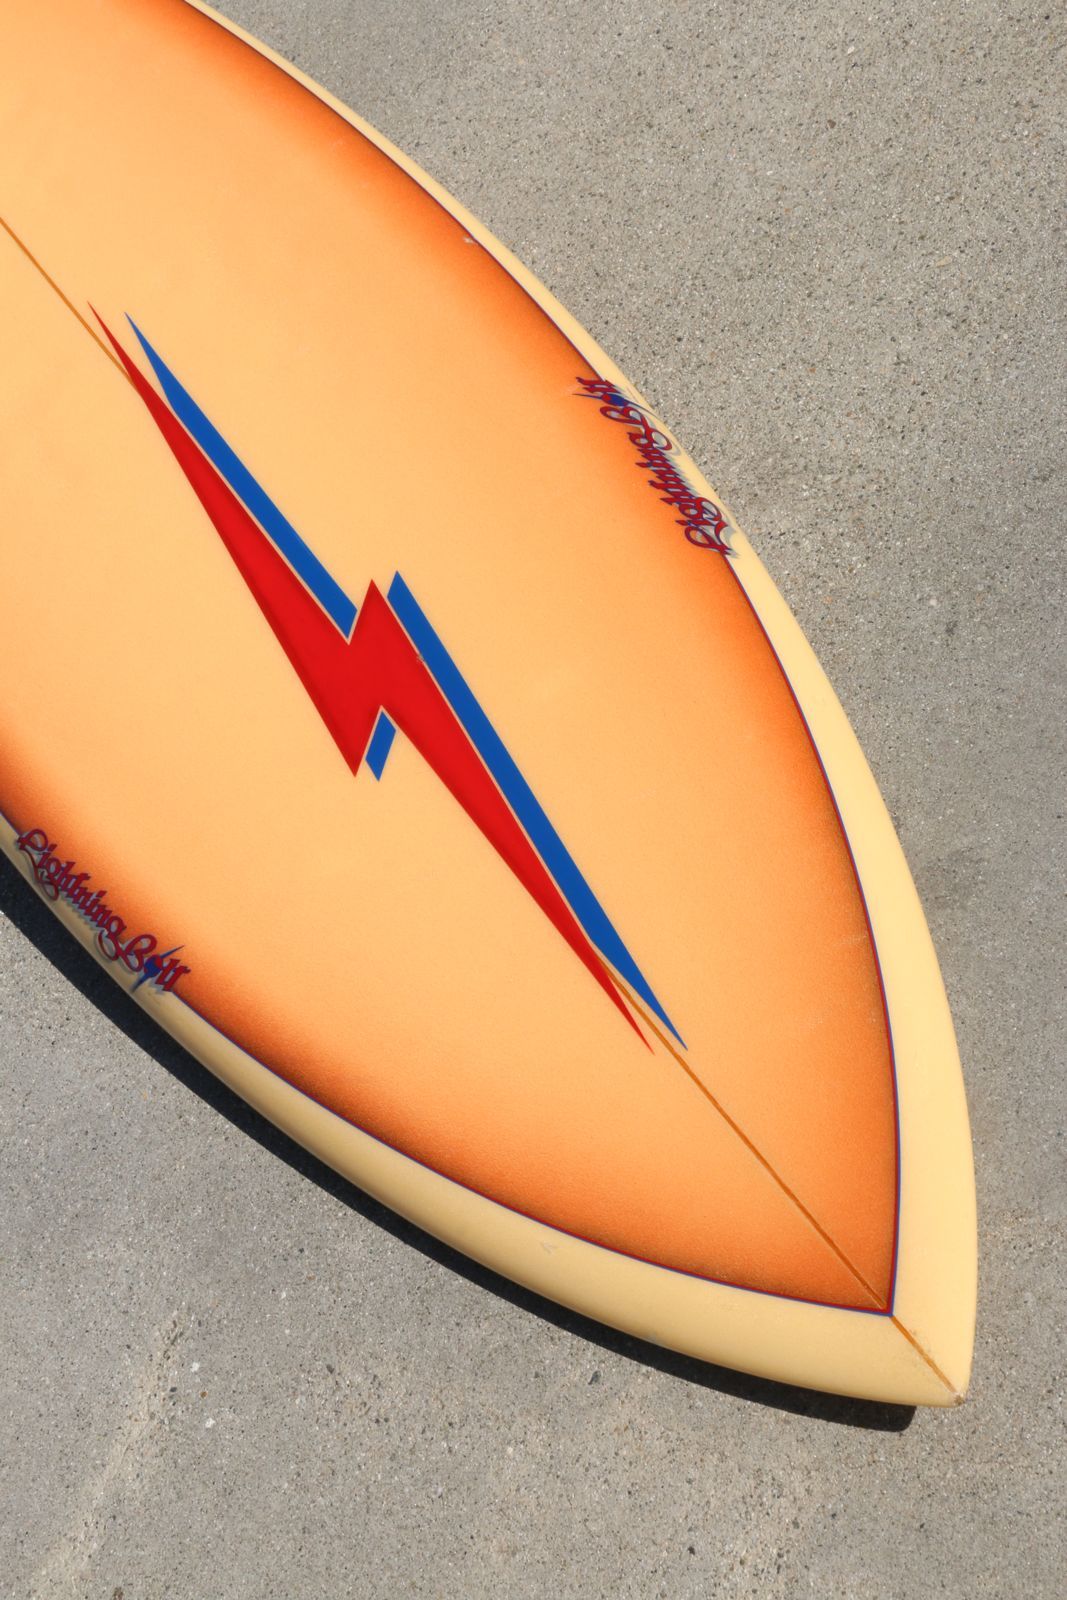 This is a rare and wonderful late 1970s airbrushed round pin Lightning Bolt surfboard with detachable single fin. Beautiful red and blue pin-striping with feathered airbrush that blends from dark to light and a prominent double lightning bolt that